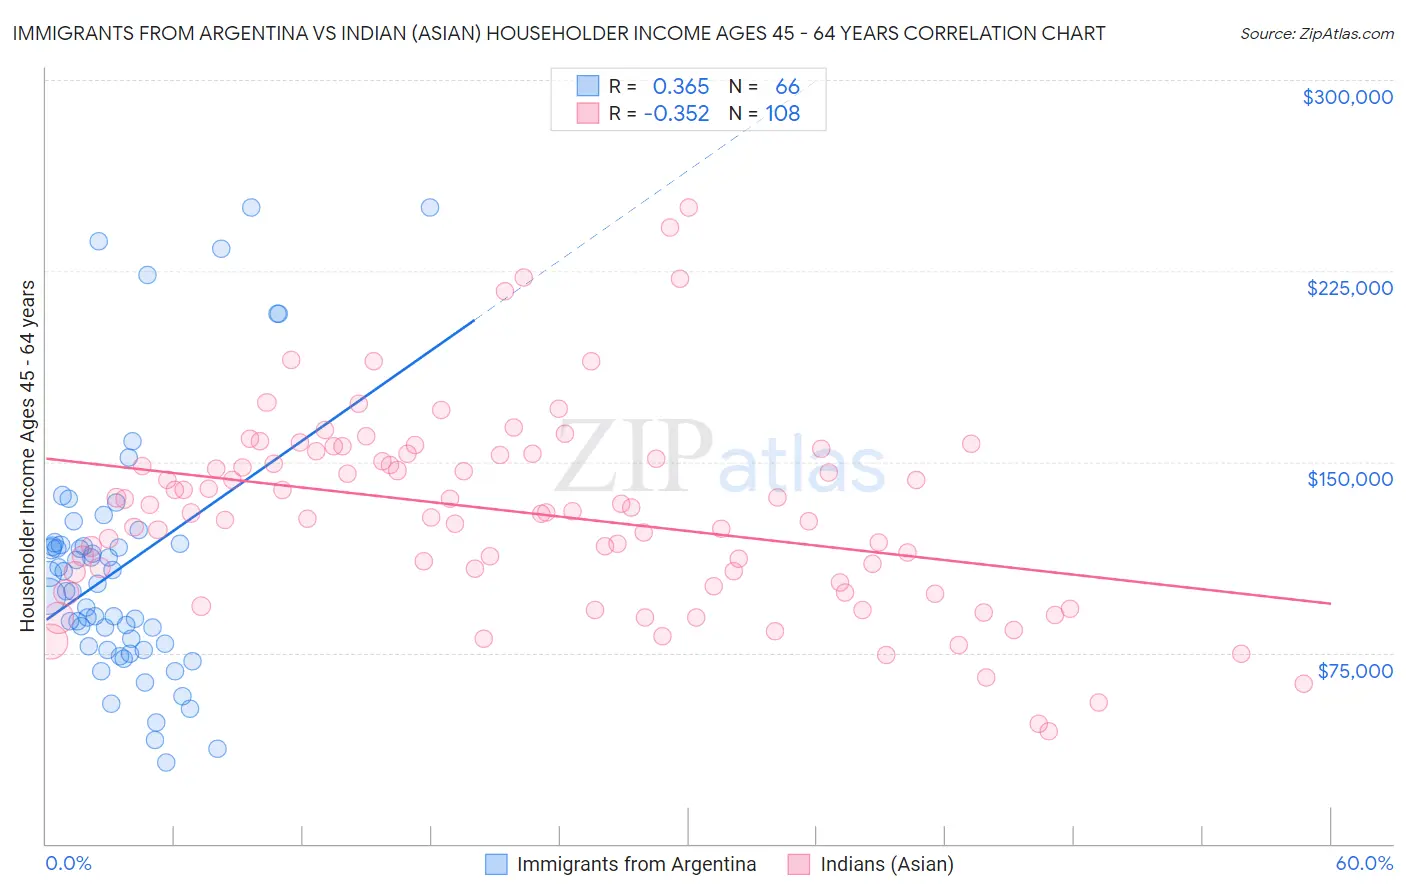 Immigrants from Argentina vs Indian (Asian) Householder Income Ages 45 - 64 years